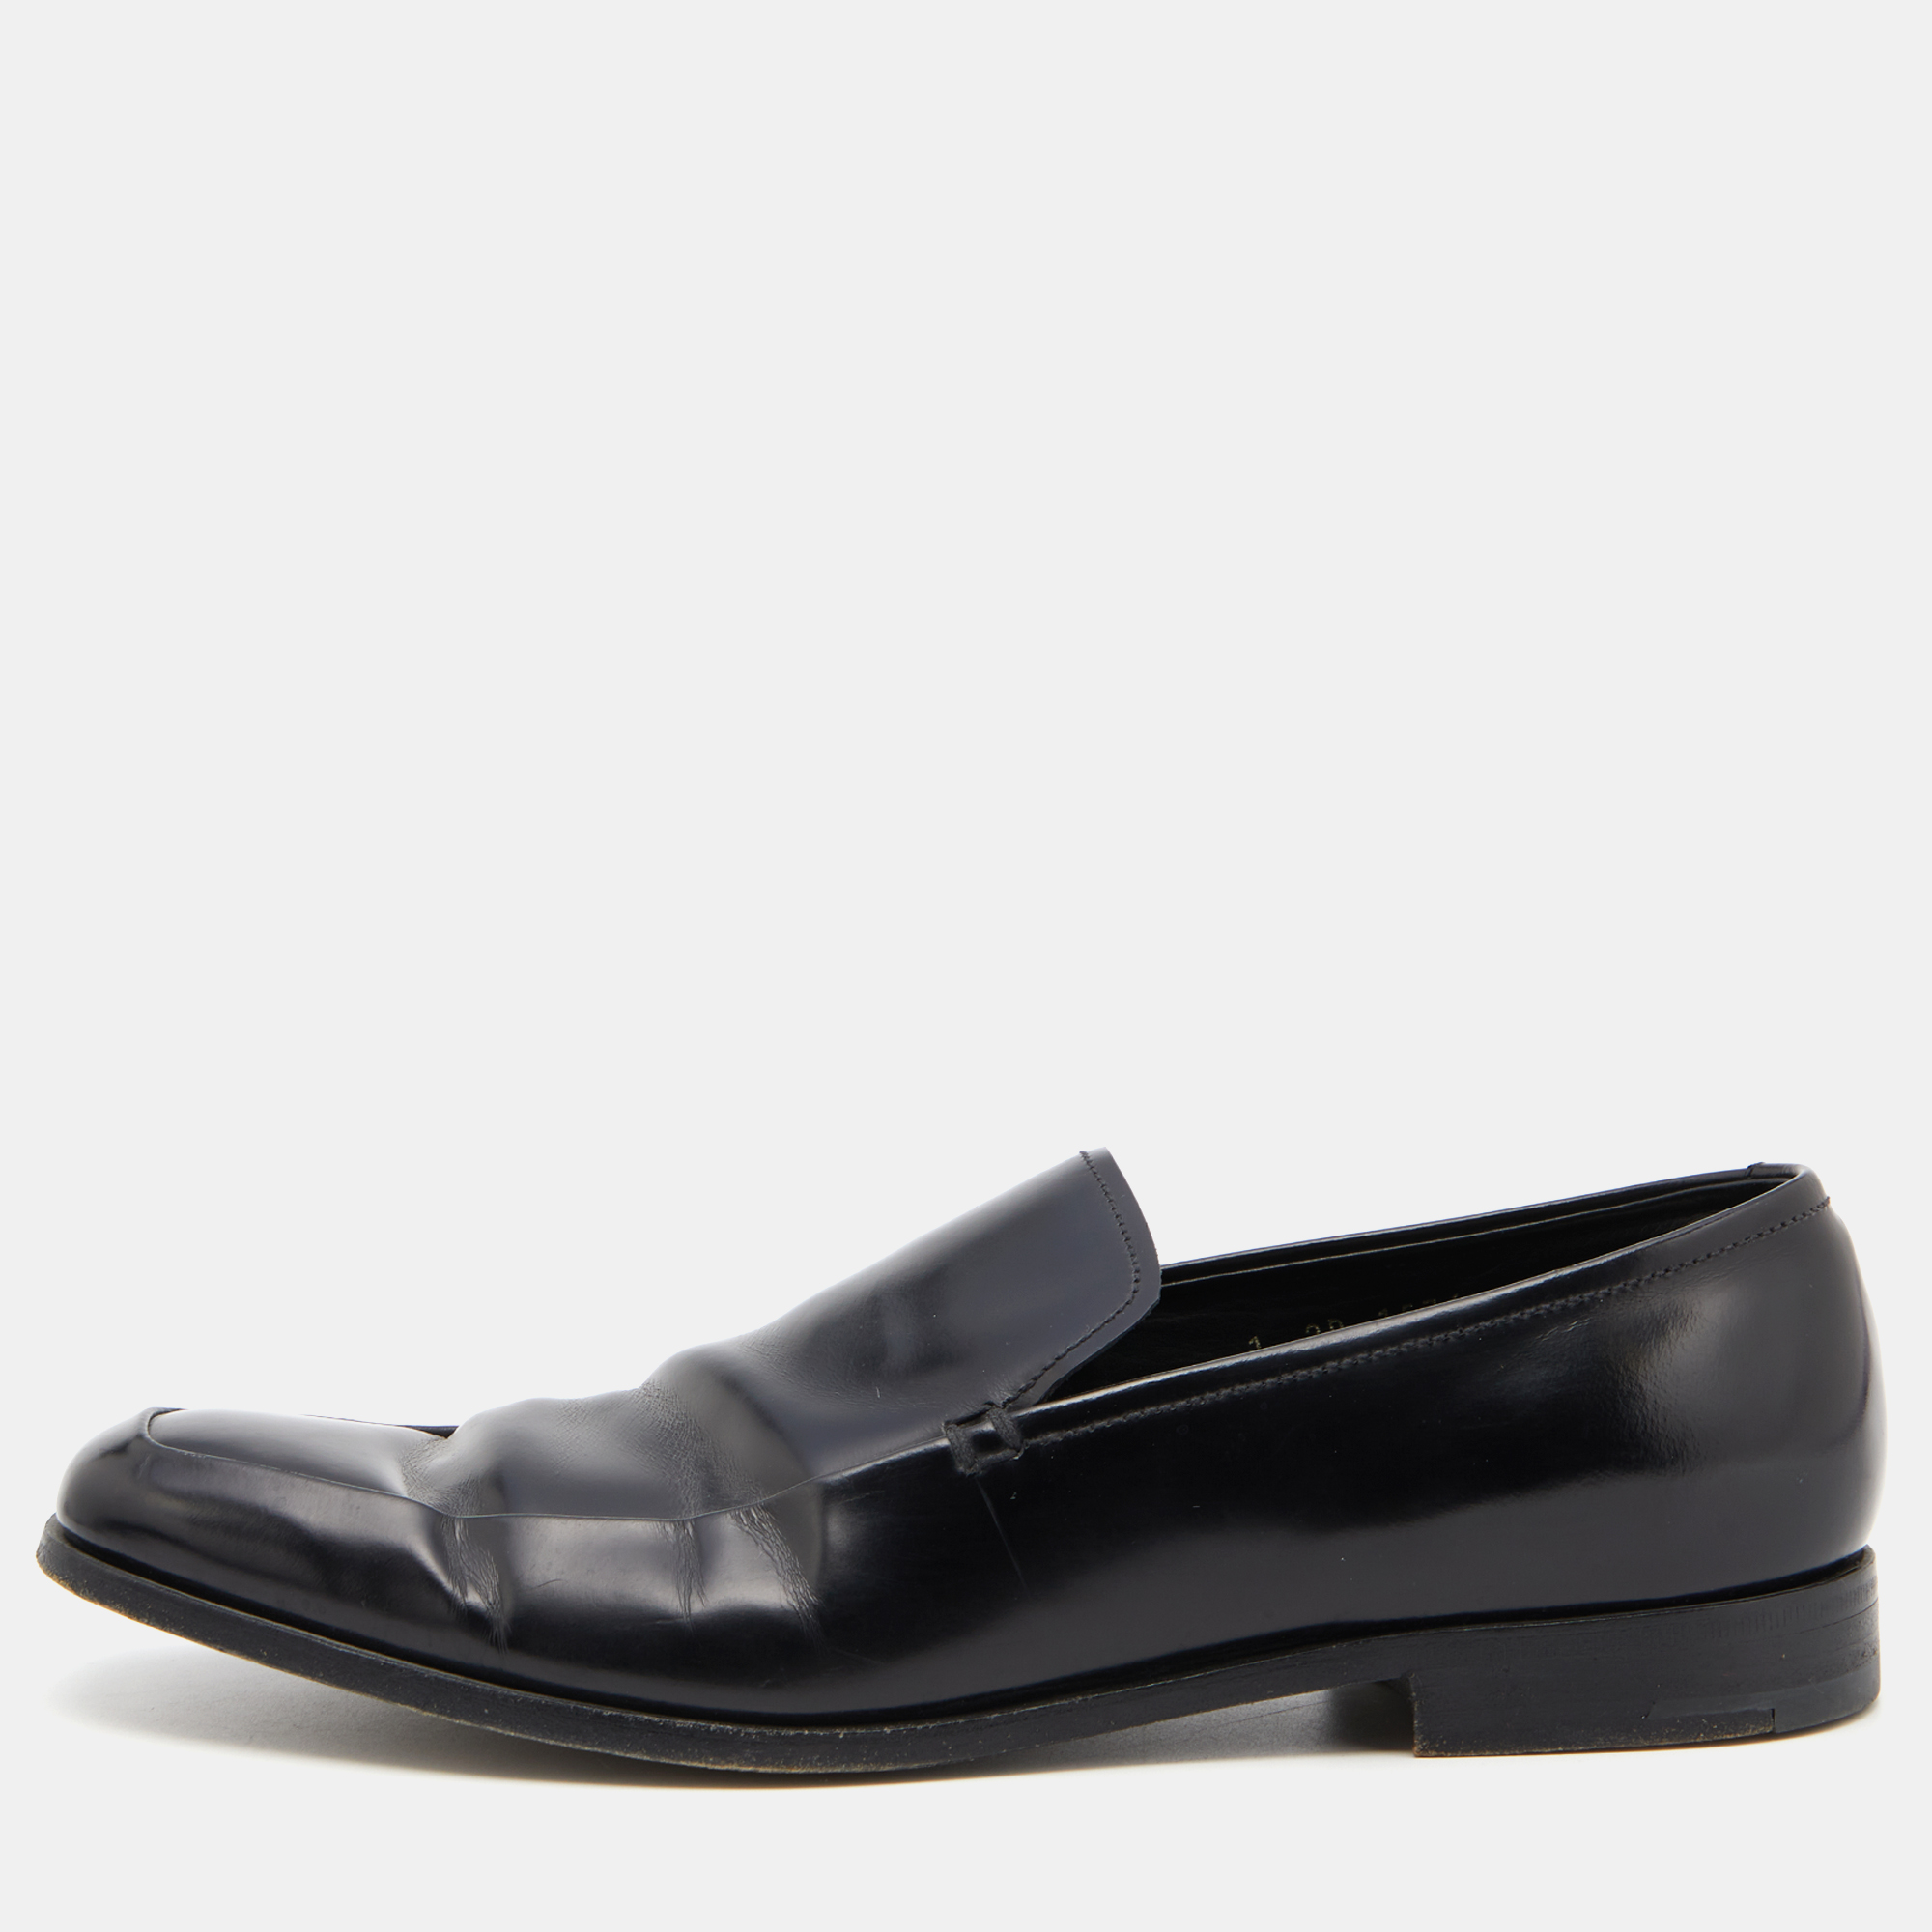 Pre-owned Prada Black Leather Slip On Loafers Size 40